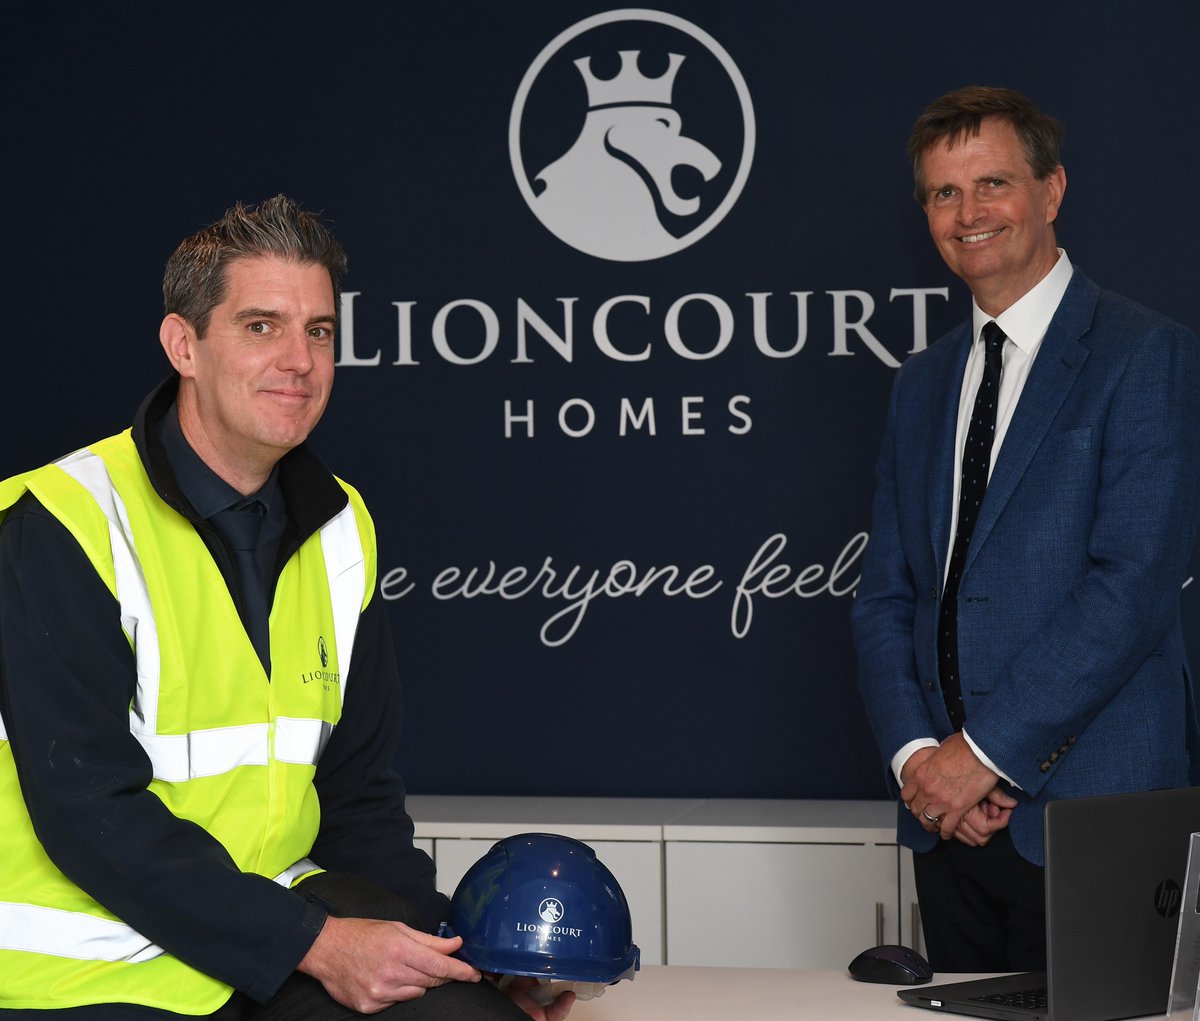 Wishing the best of luck to Mark from our team who has been shortlisted for an award at the @NHBC Supreme Awards this Friday. Read more here: lioncourthomes.com/news-post/nati… #PiJAwards2022 #PrideintheJob #NHBCPIJ #Construction #HouseBuilding